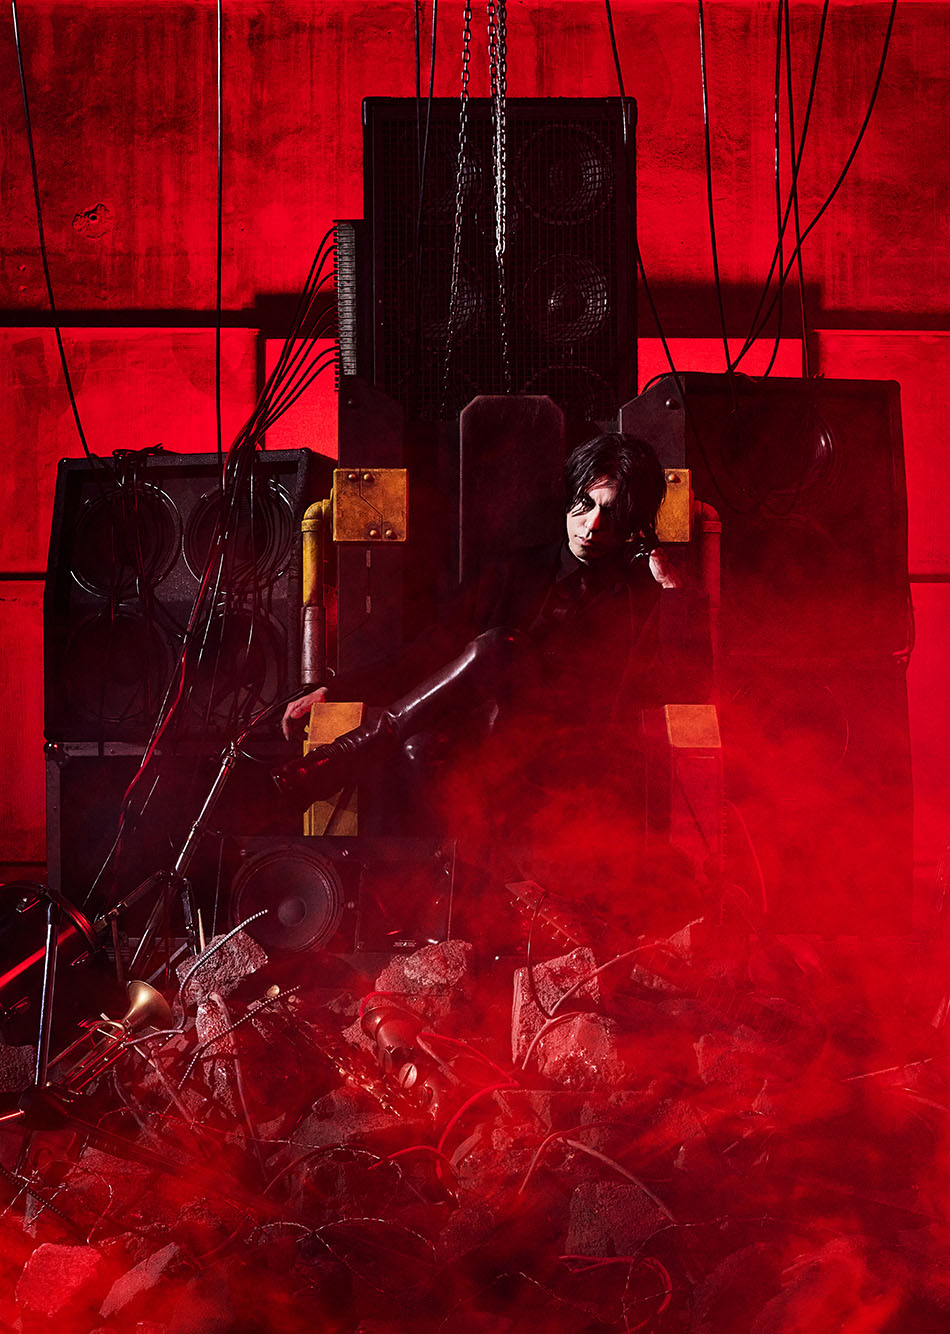 HAZUKI solo pic. HAZUKI is sitting on a throne made of guitar amps.